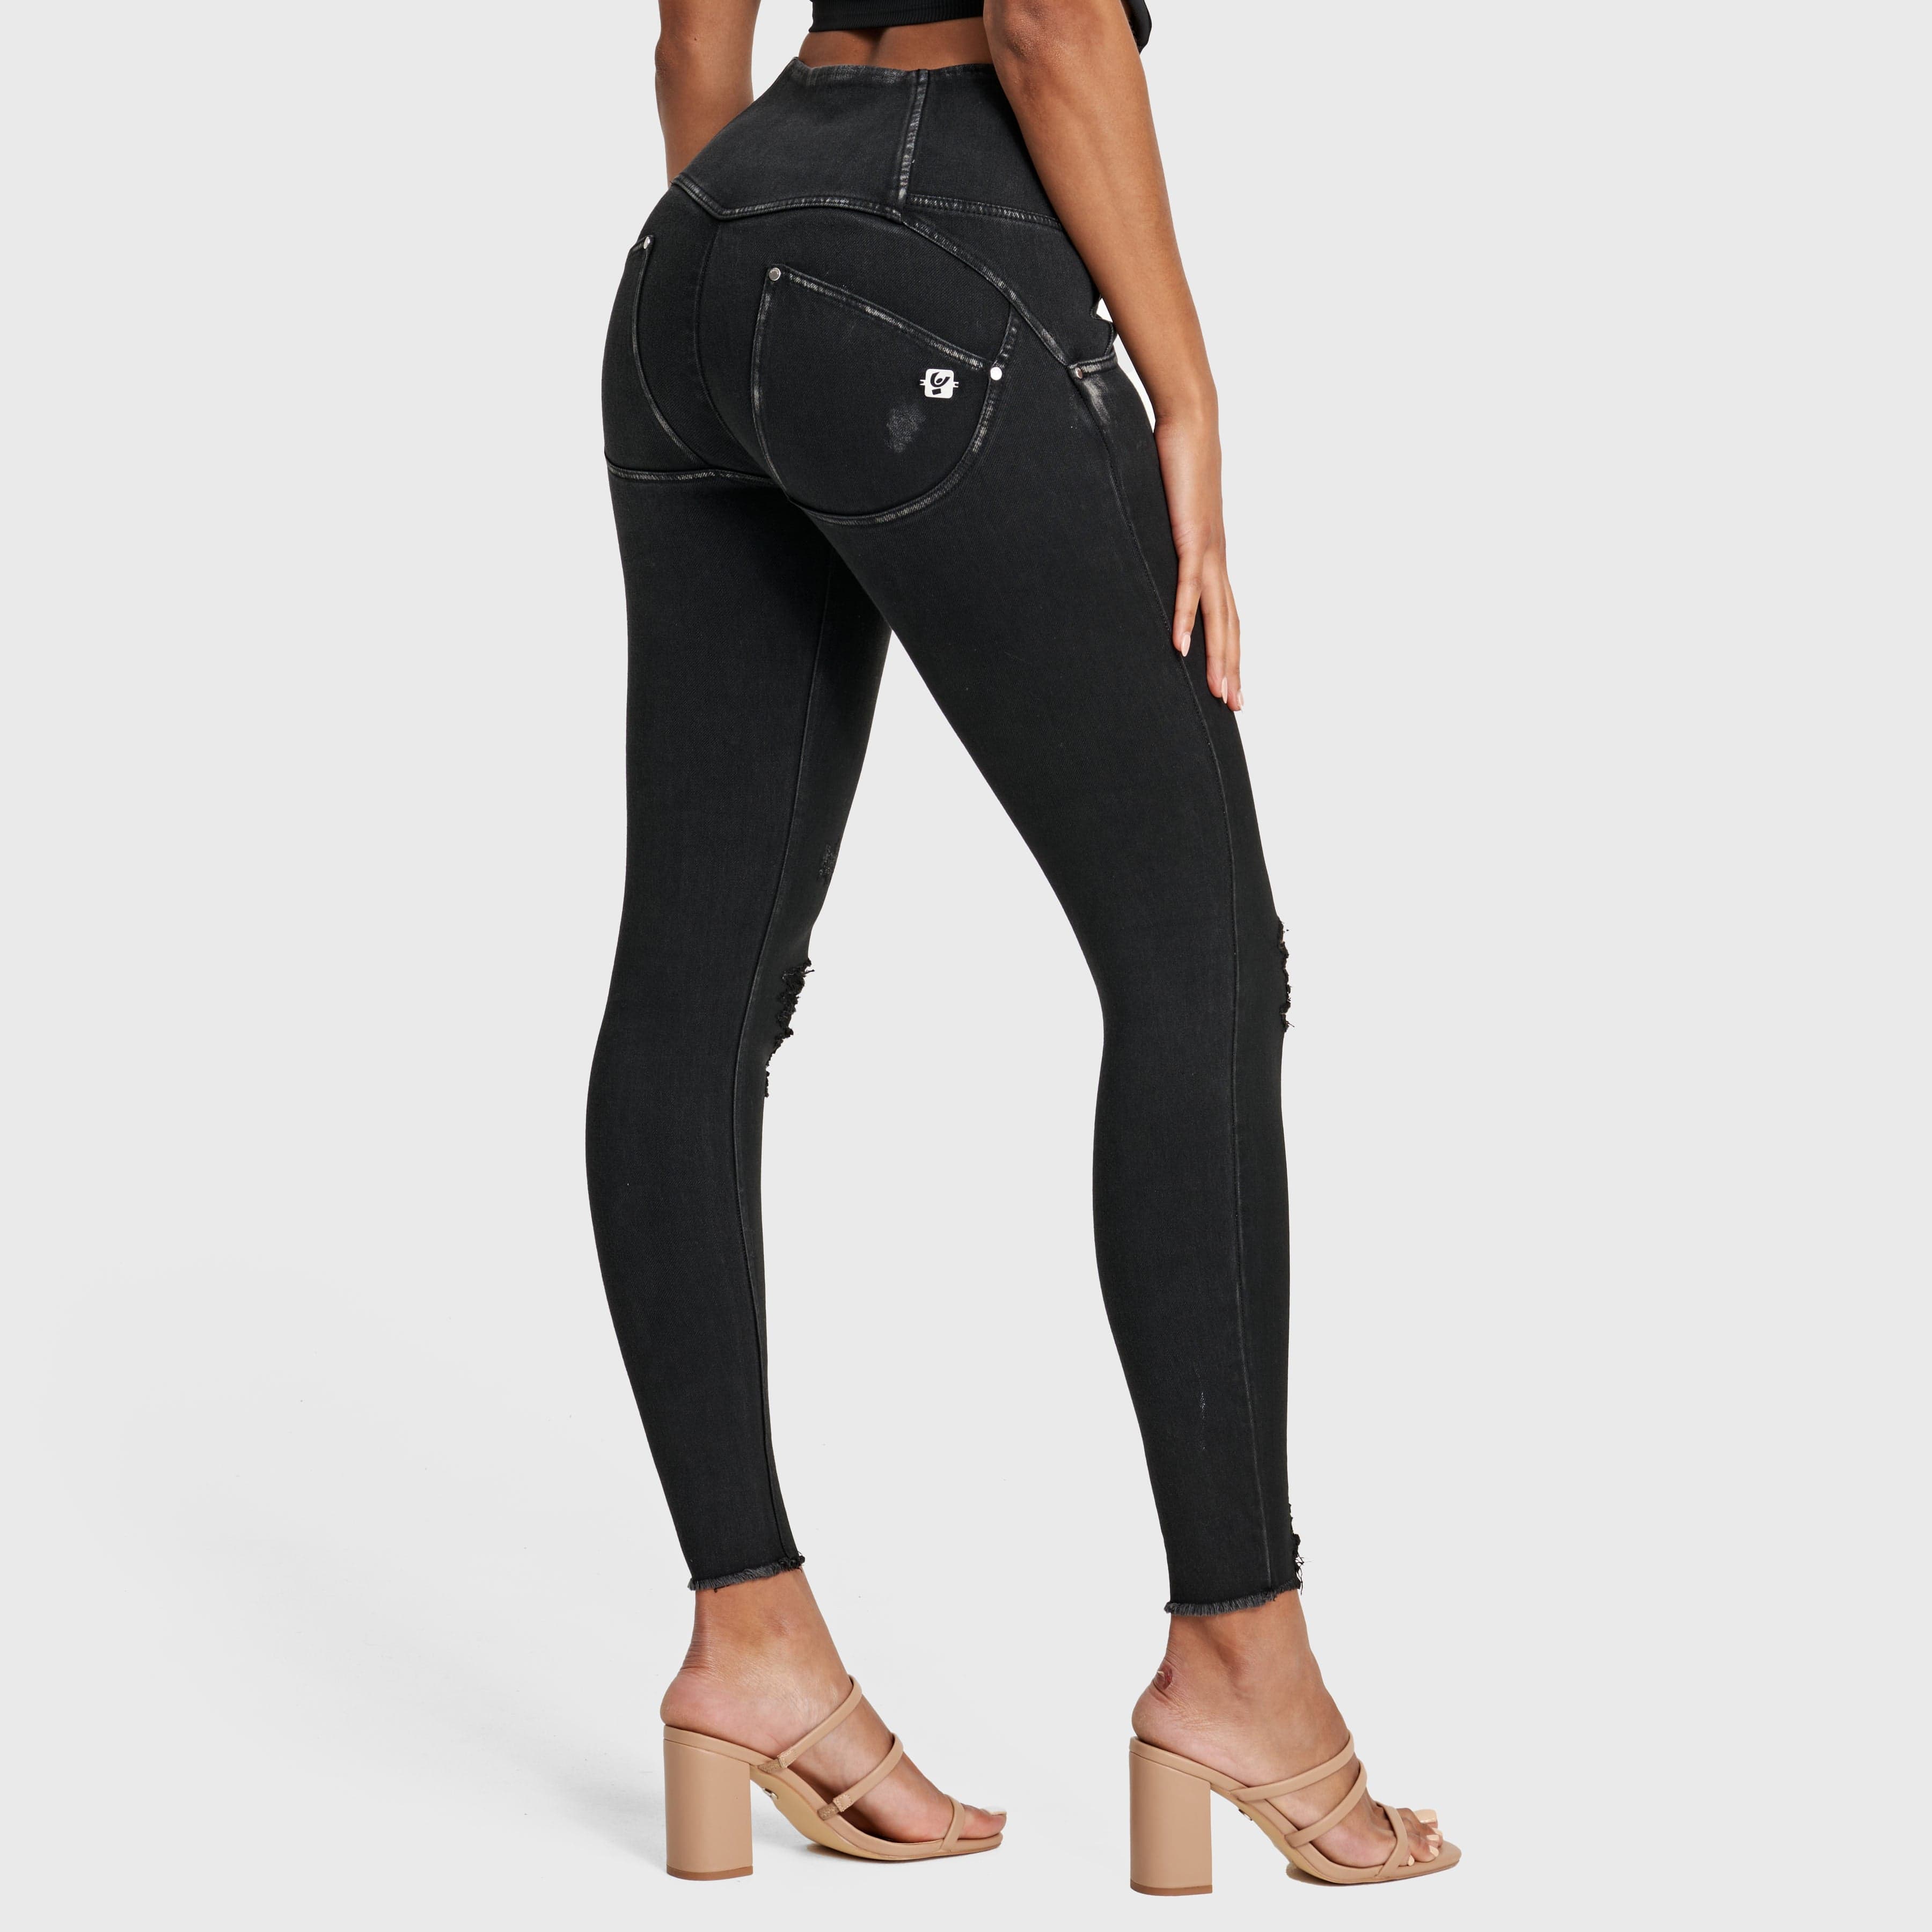 WR.UP® Snug Ripped Jeans - High Waisted - Full Length - Coated Black + Black Stitching 2